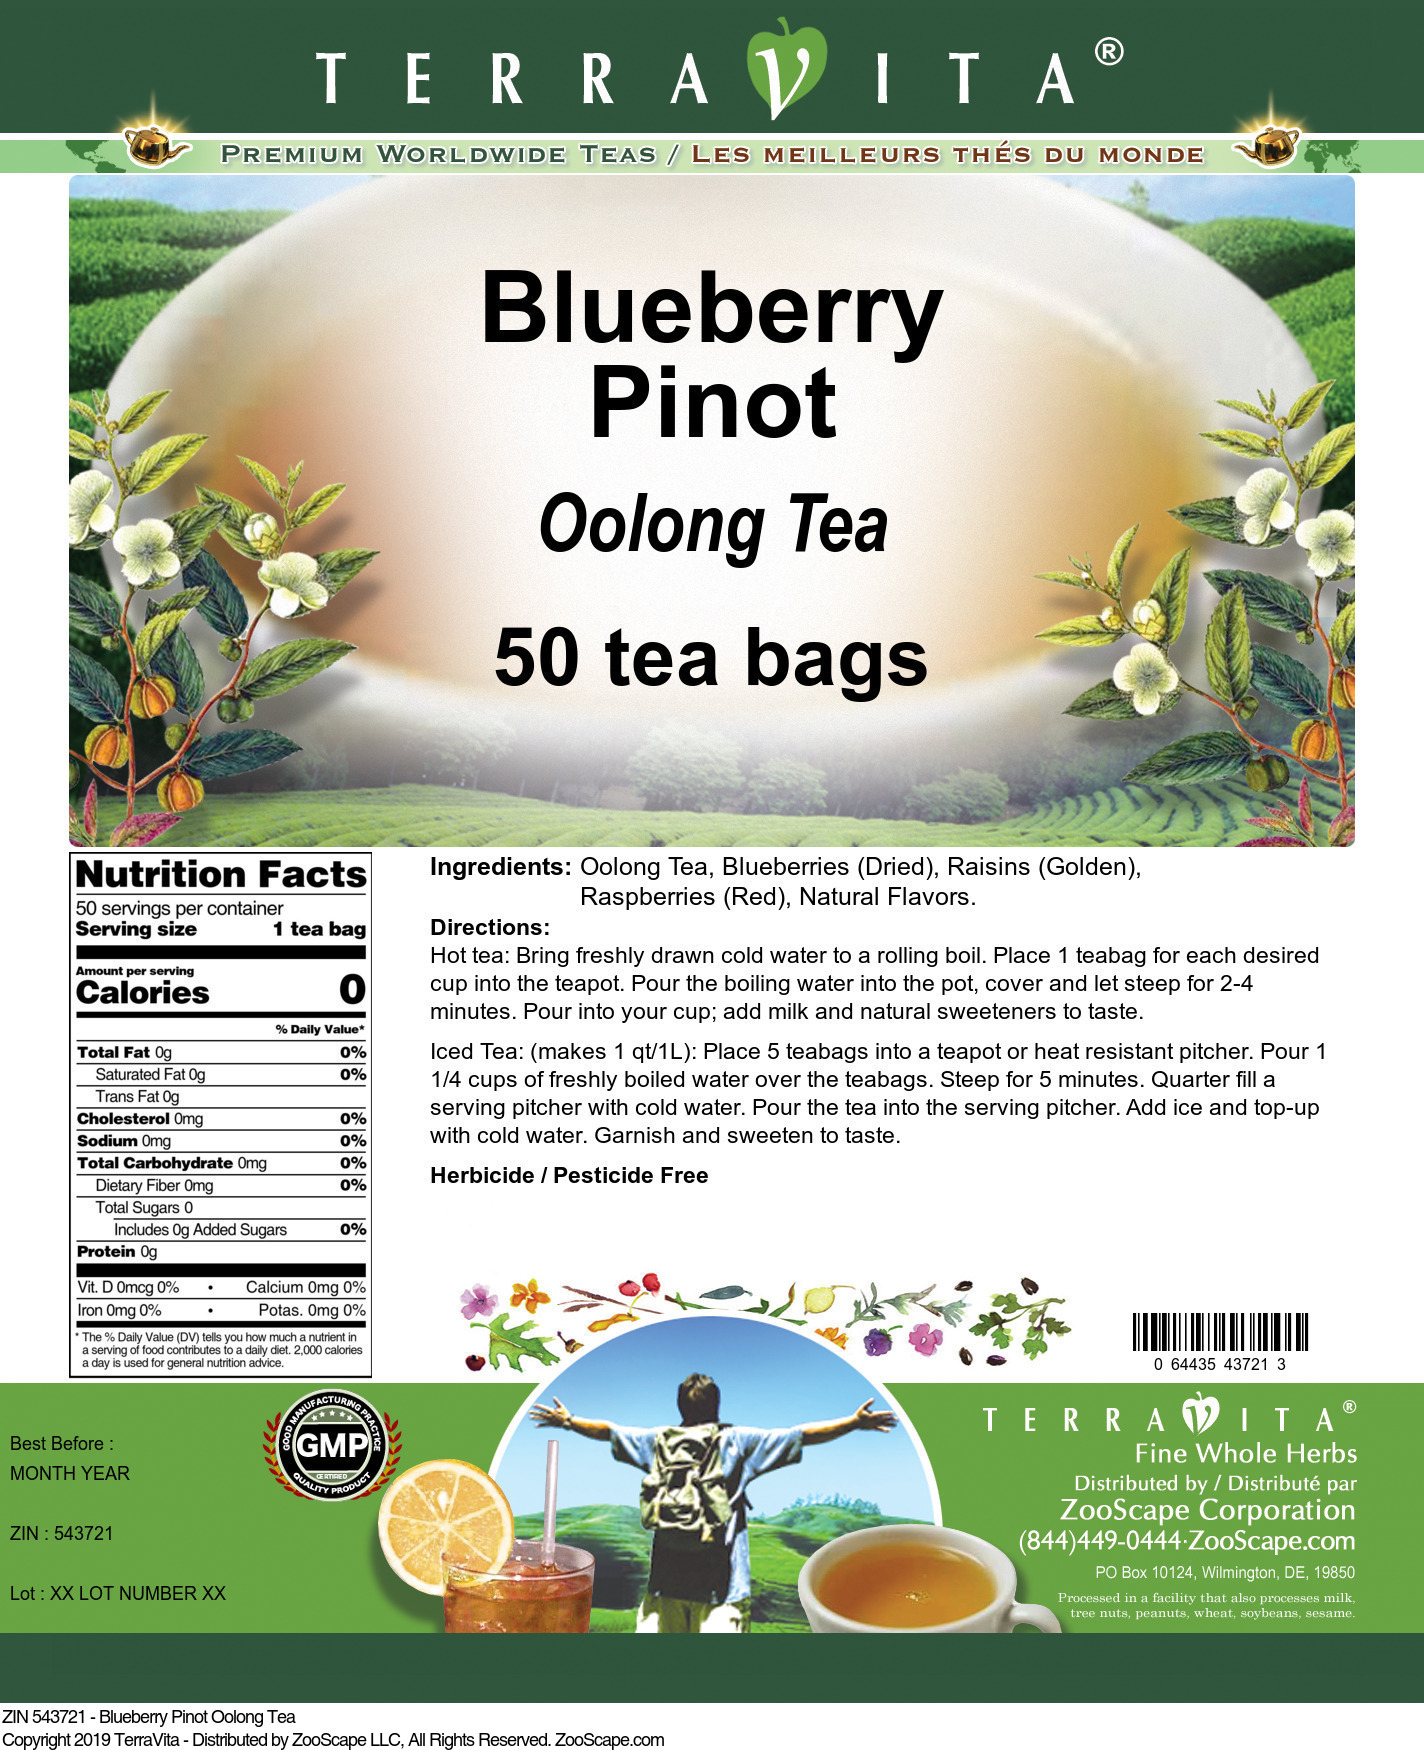 Blueberry Pinot Oolong Tea - Label